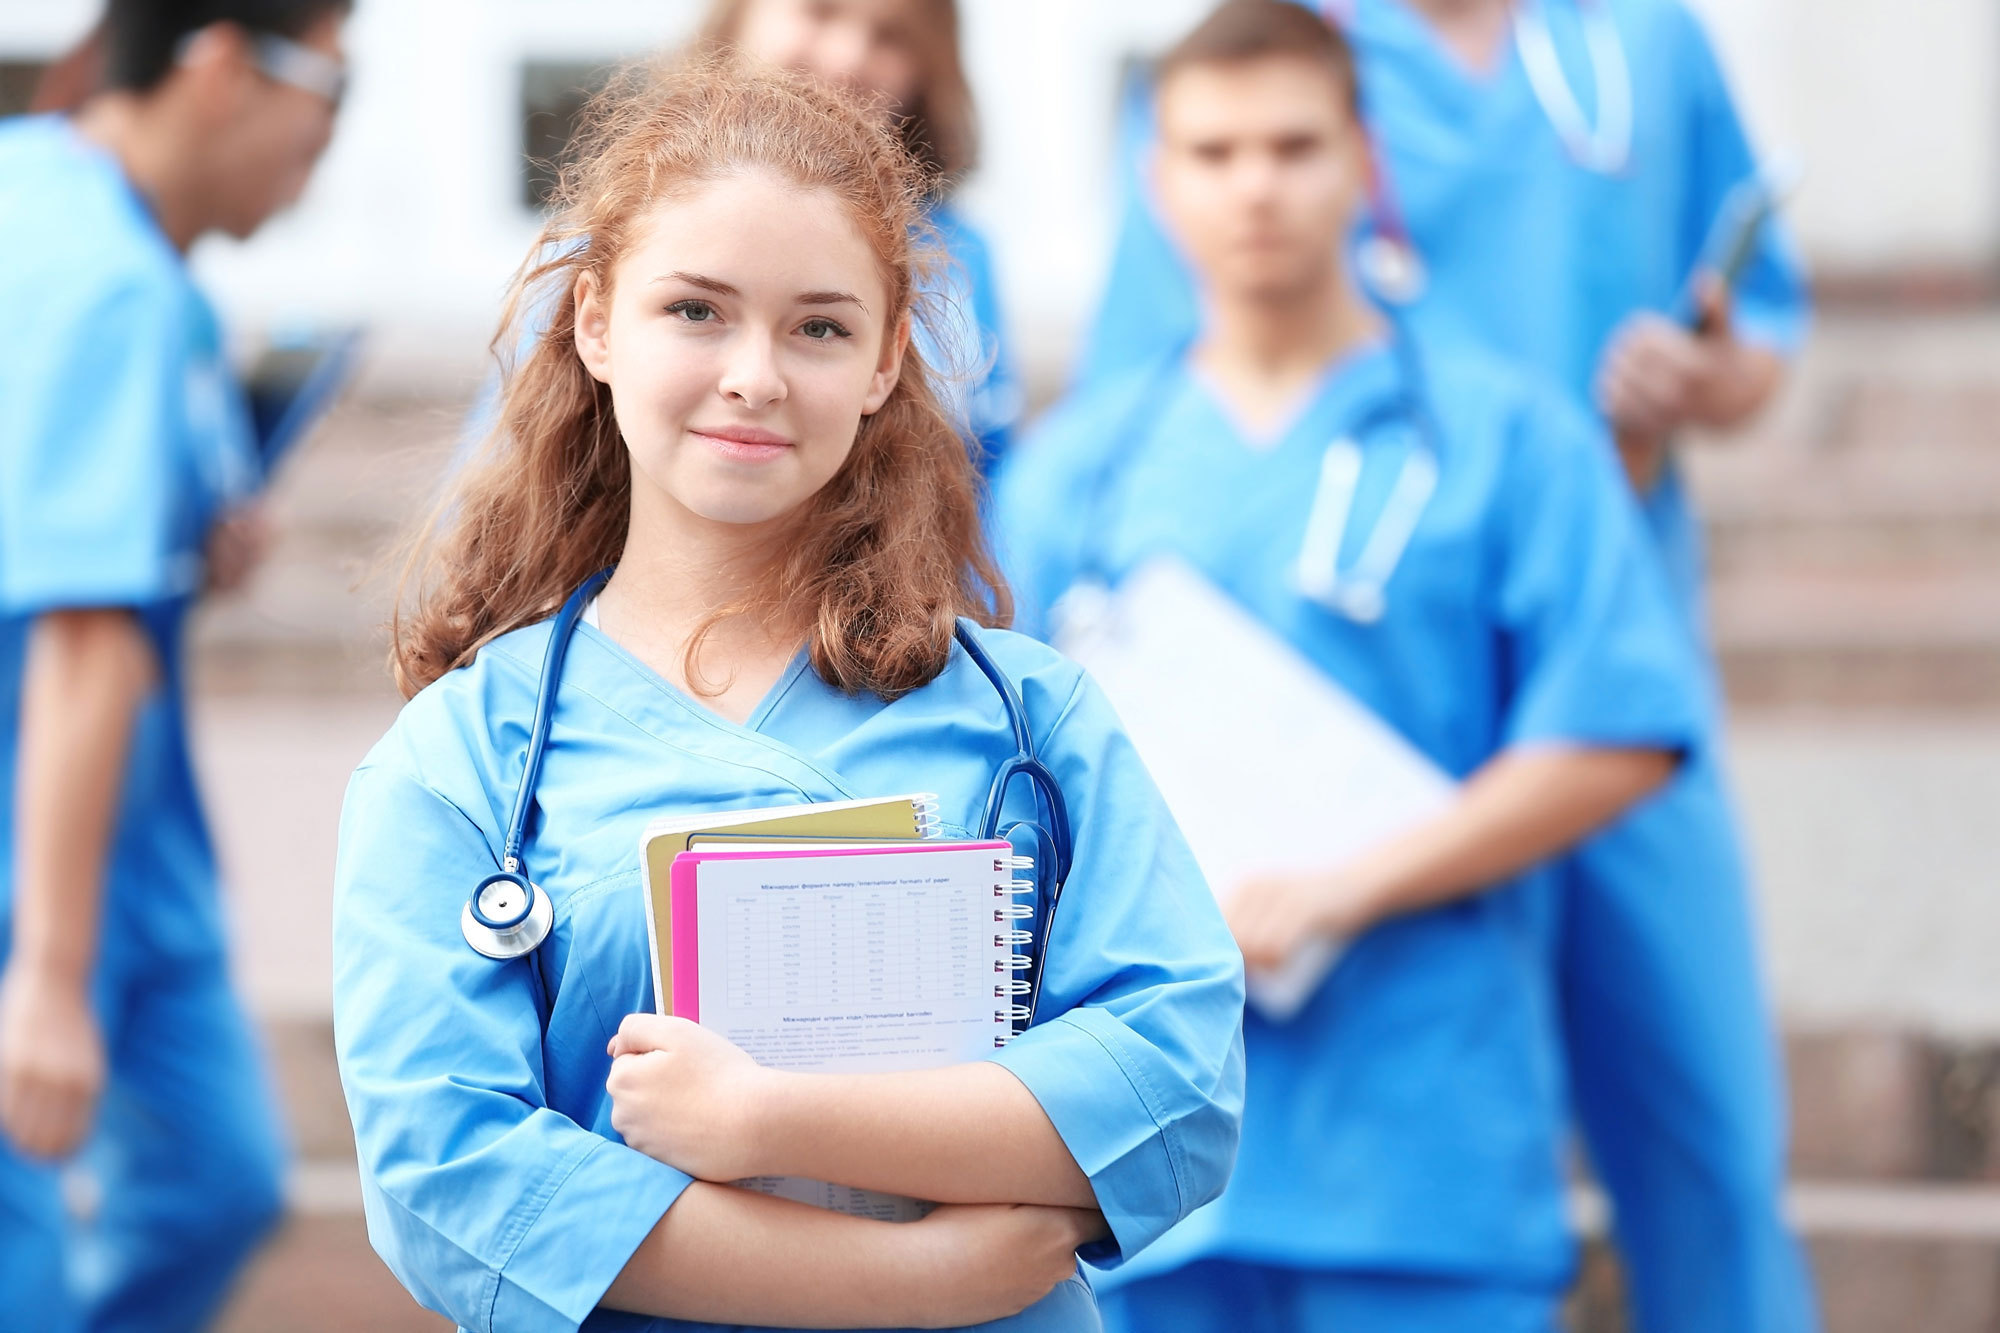 Beckfield College Student Image - Healthcare Career Training -Florence, KY